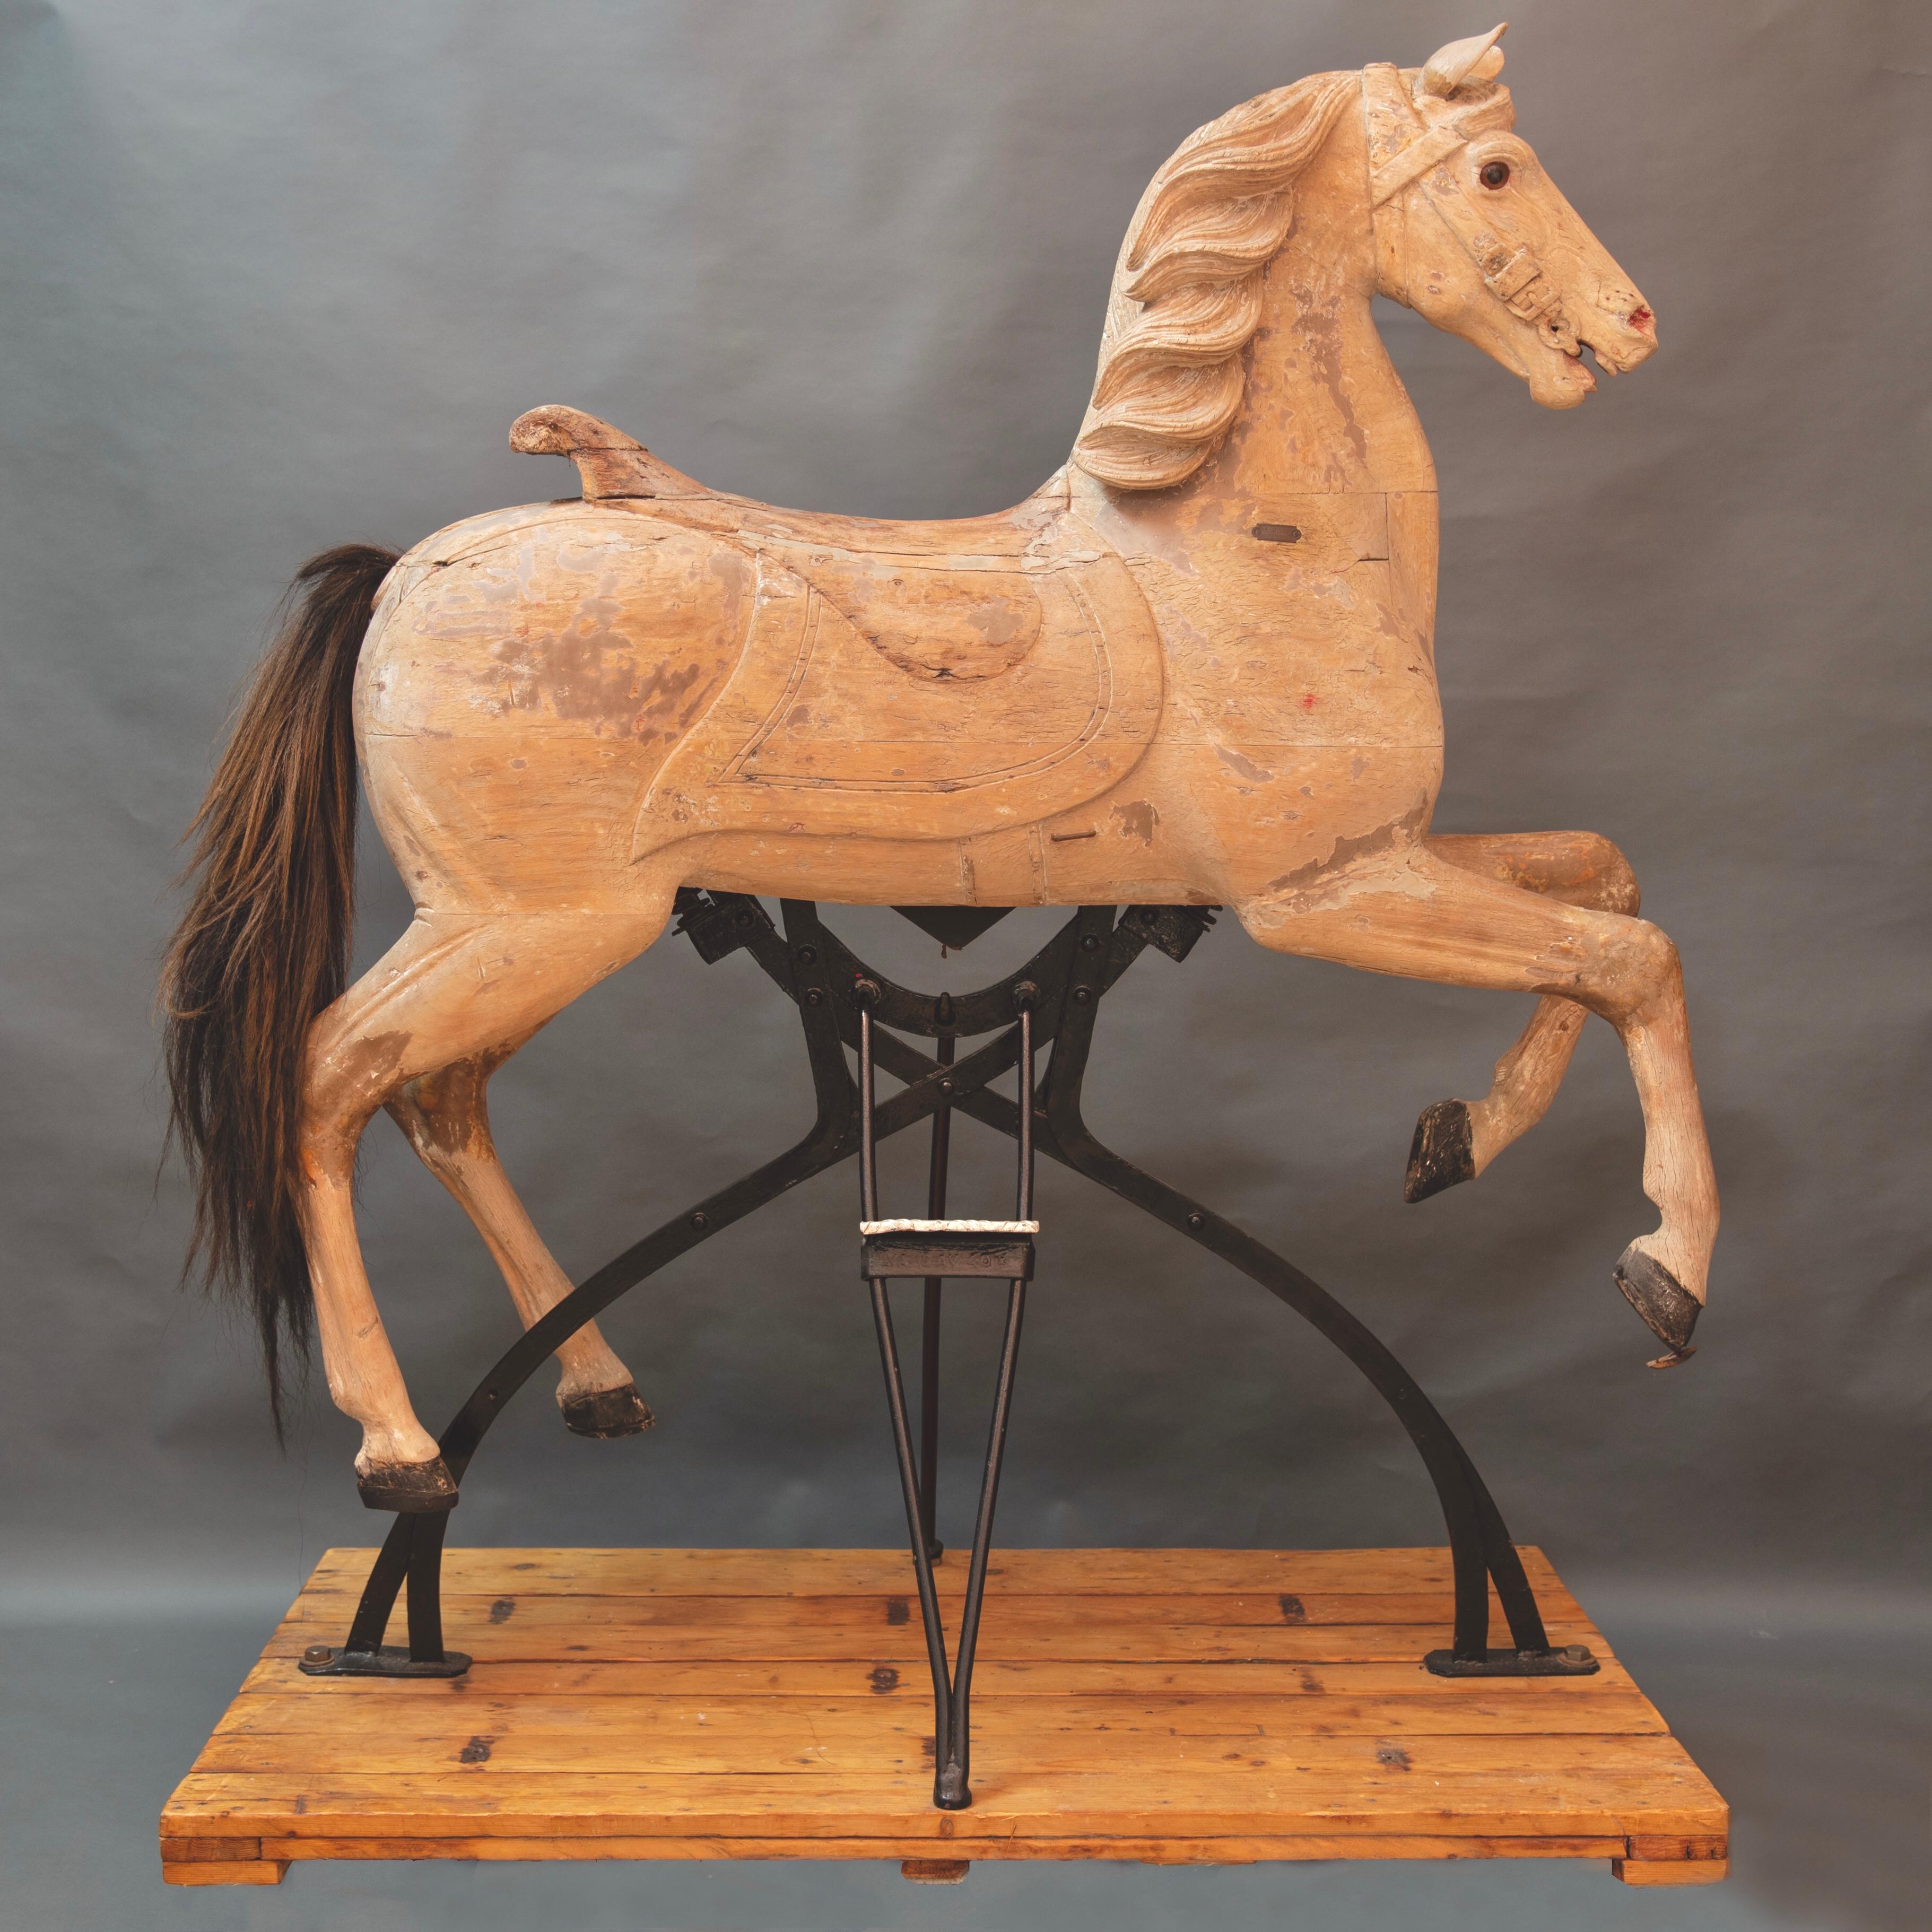 Freidrich Heyn Sculpter
Large hand carved wooden Carousel rearing horse with original label.
Gala Parade Luxury “Half Knight” rocking horse model.
 Published in Richard Ward and Geoff Weedon’s Fairground Art book on page 45 (photos on